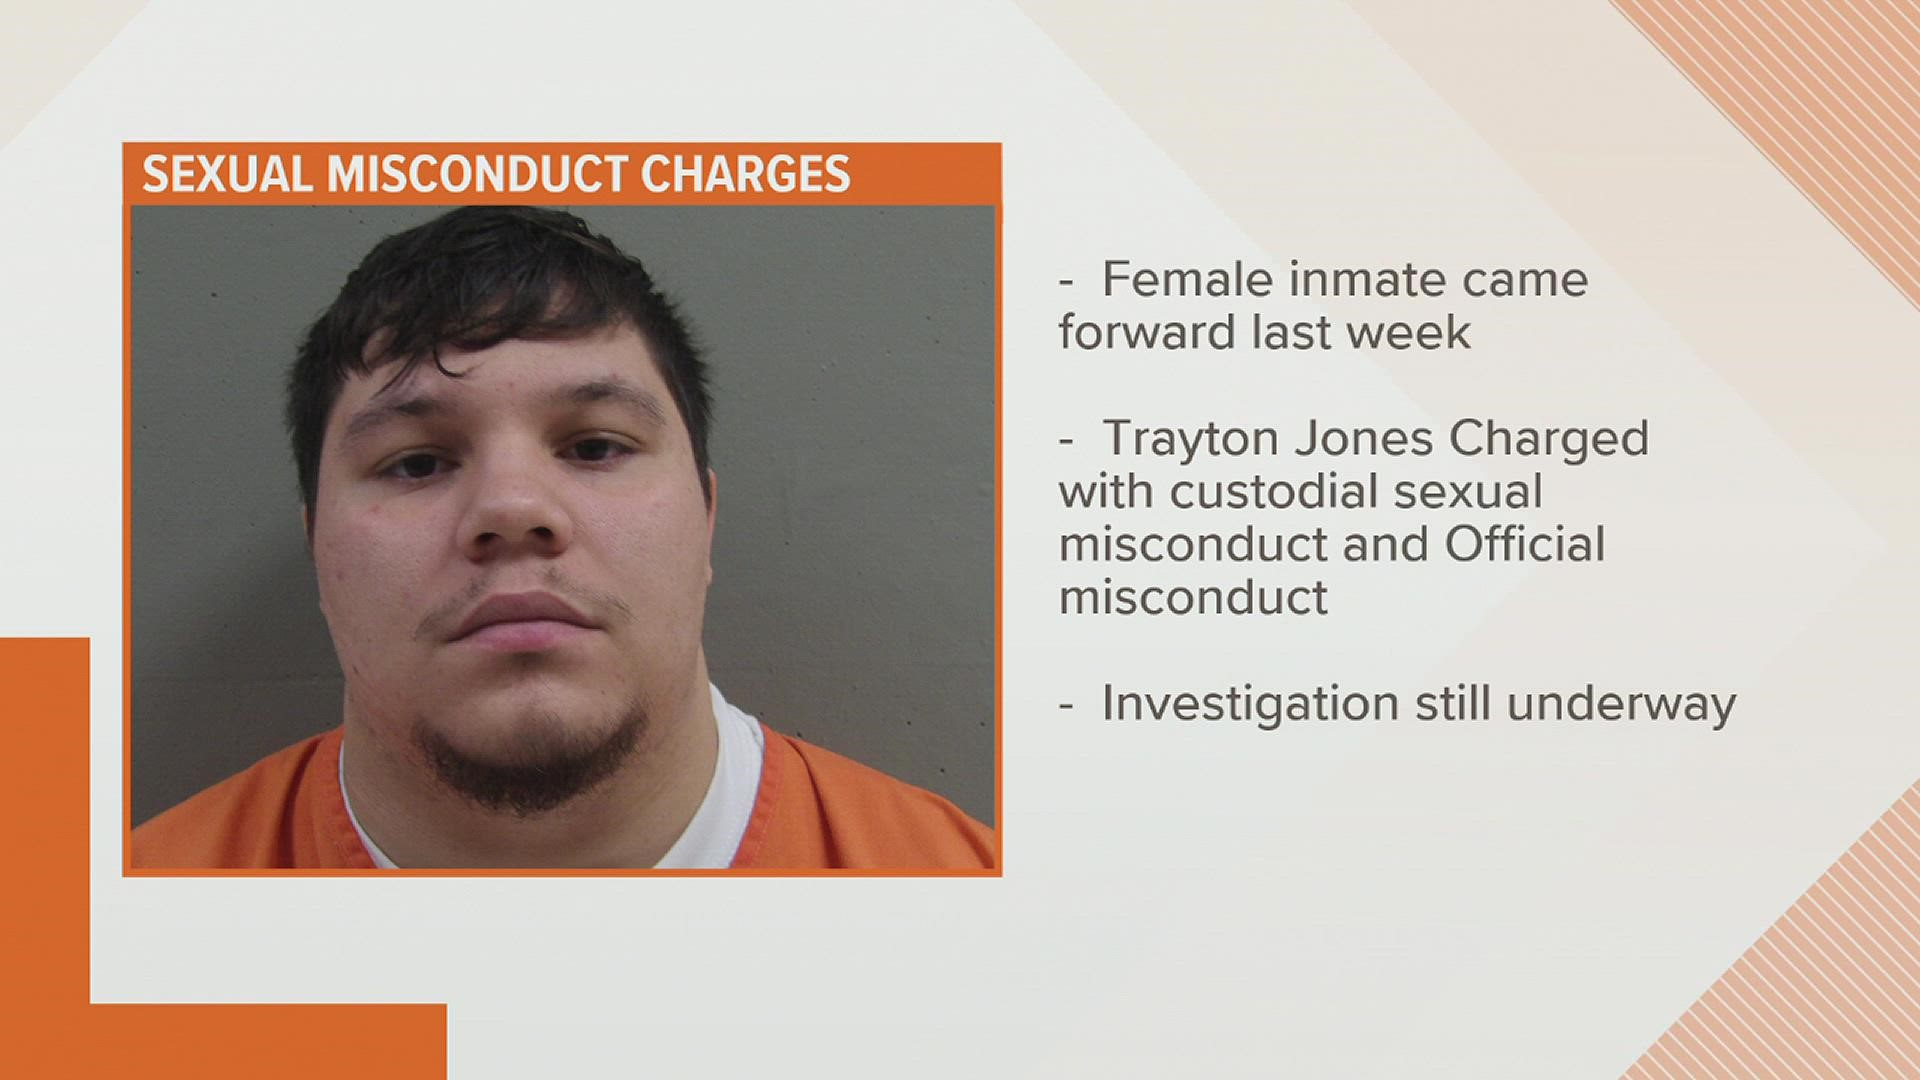 A news release from the Illinois sheriff's department says Trayton Jones, 21, has been terminated from his position following an allegation from a female inmate.